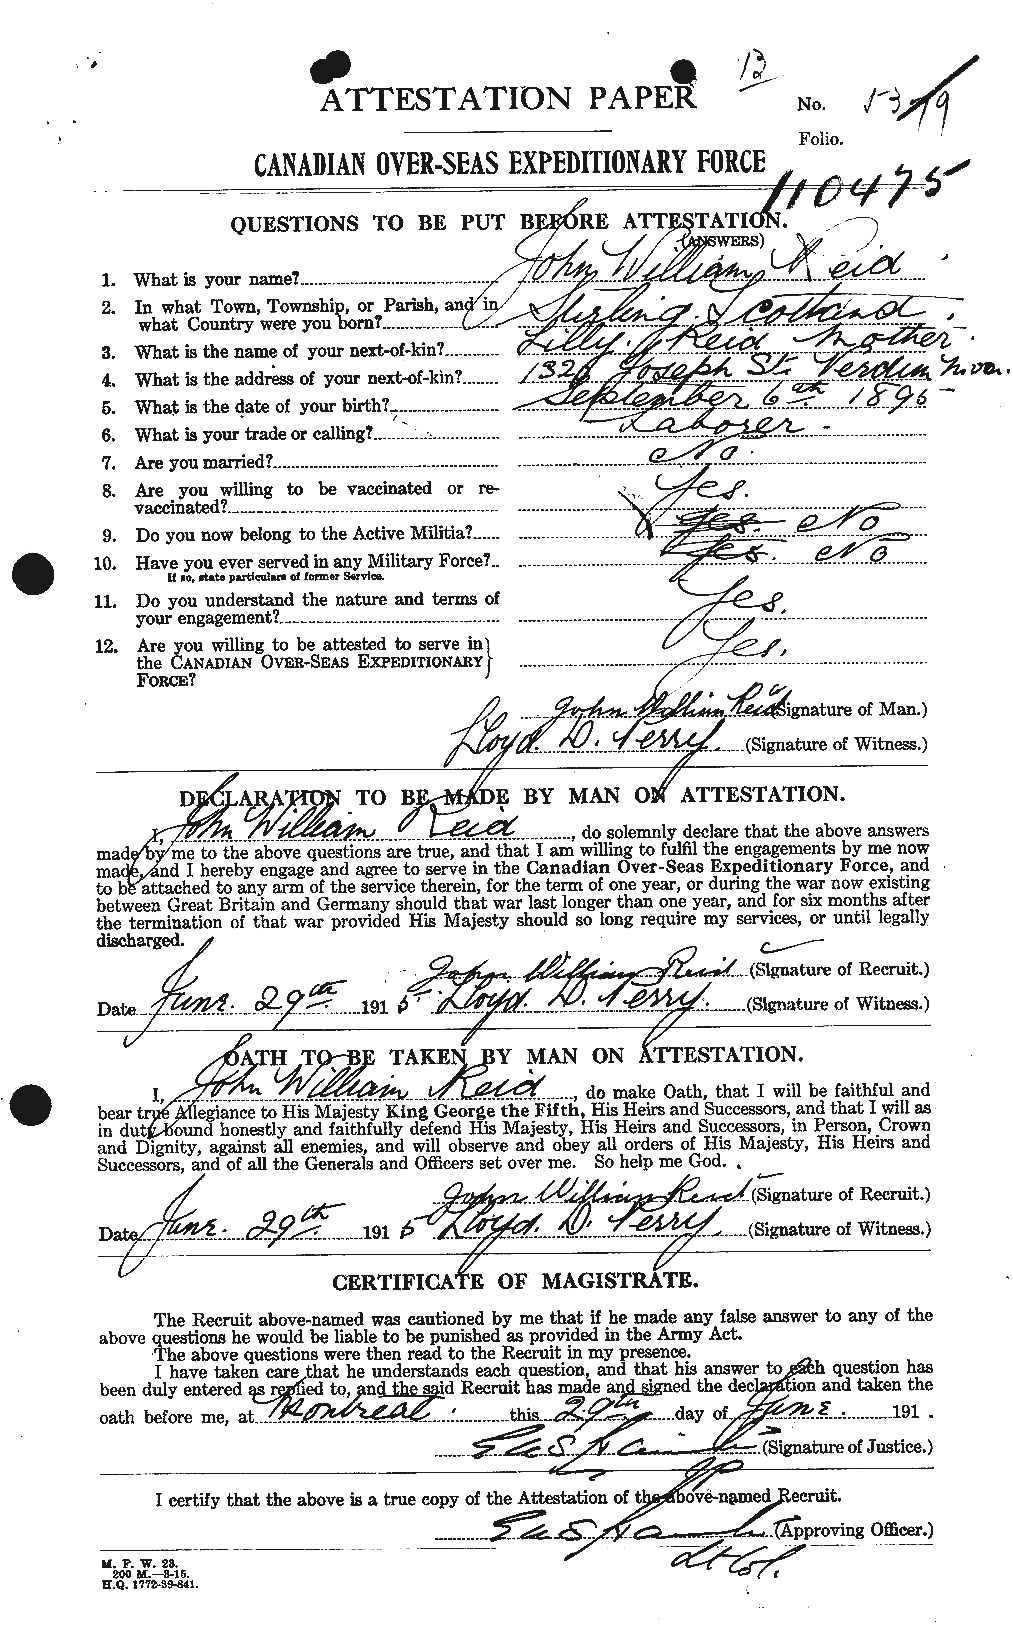 Personnel Records of the First World War - CEF 598886a